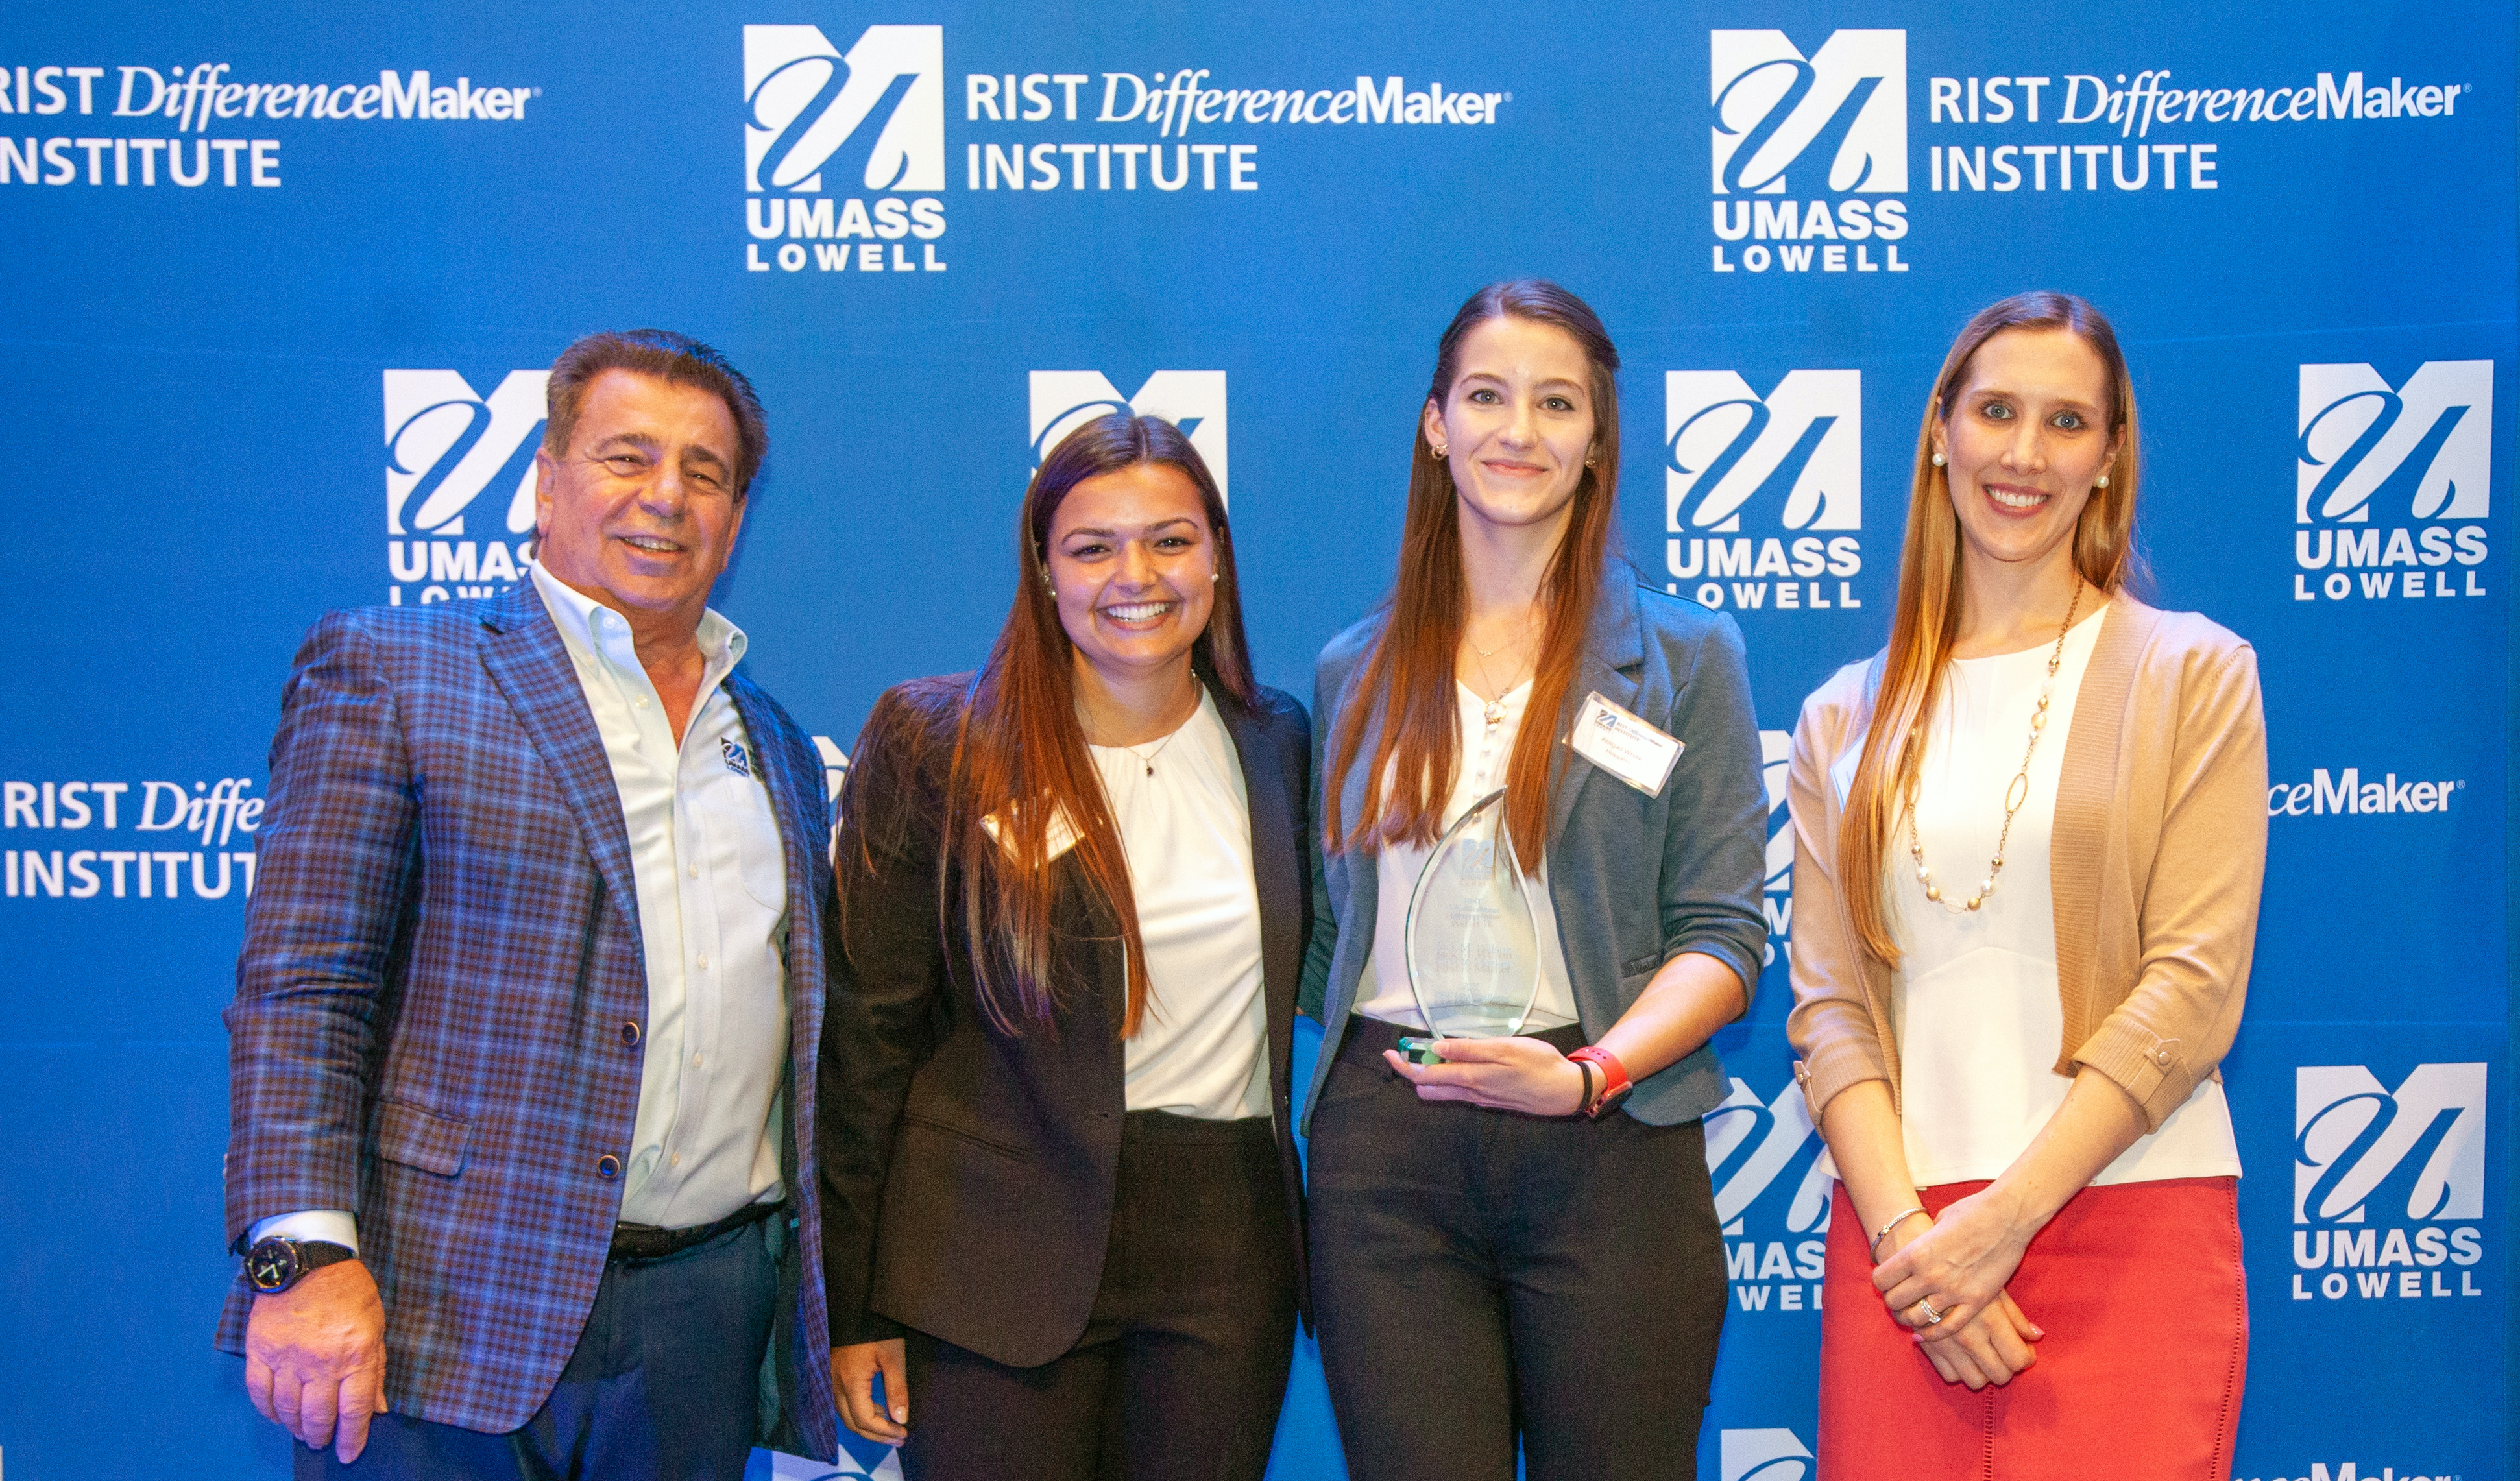 2 female students from the HOPPERS team holding an award pose with Brian Rist and Holly Lalos of Difference Makers against a blue UMass Lowell backdrop.